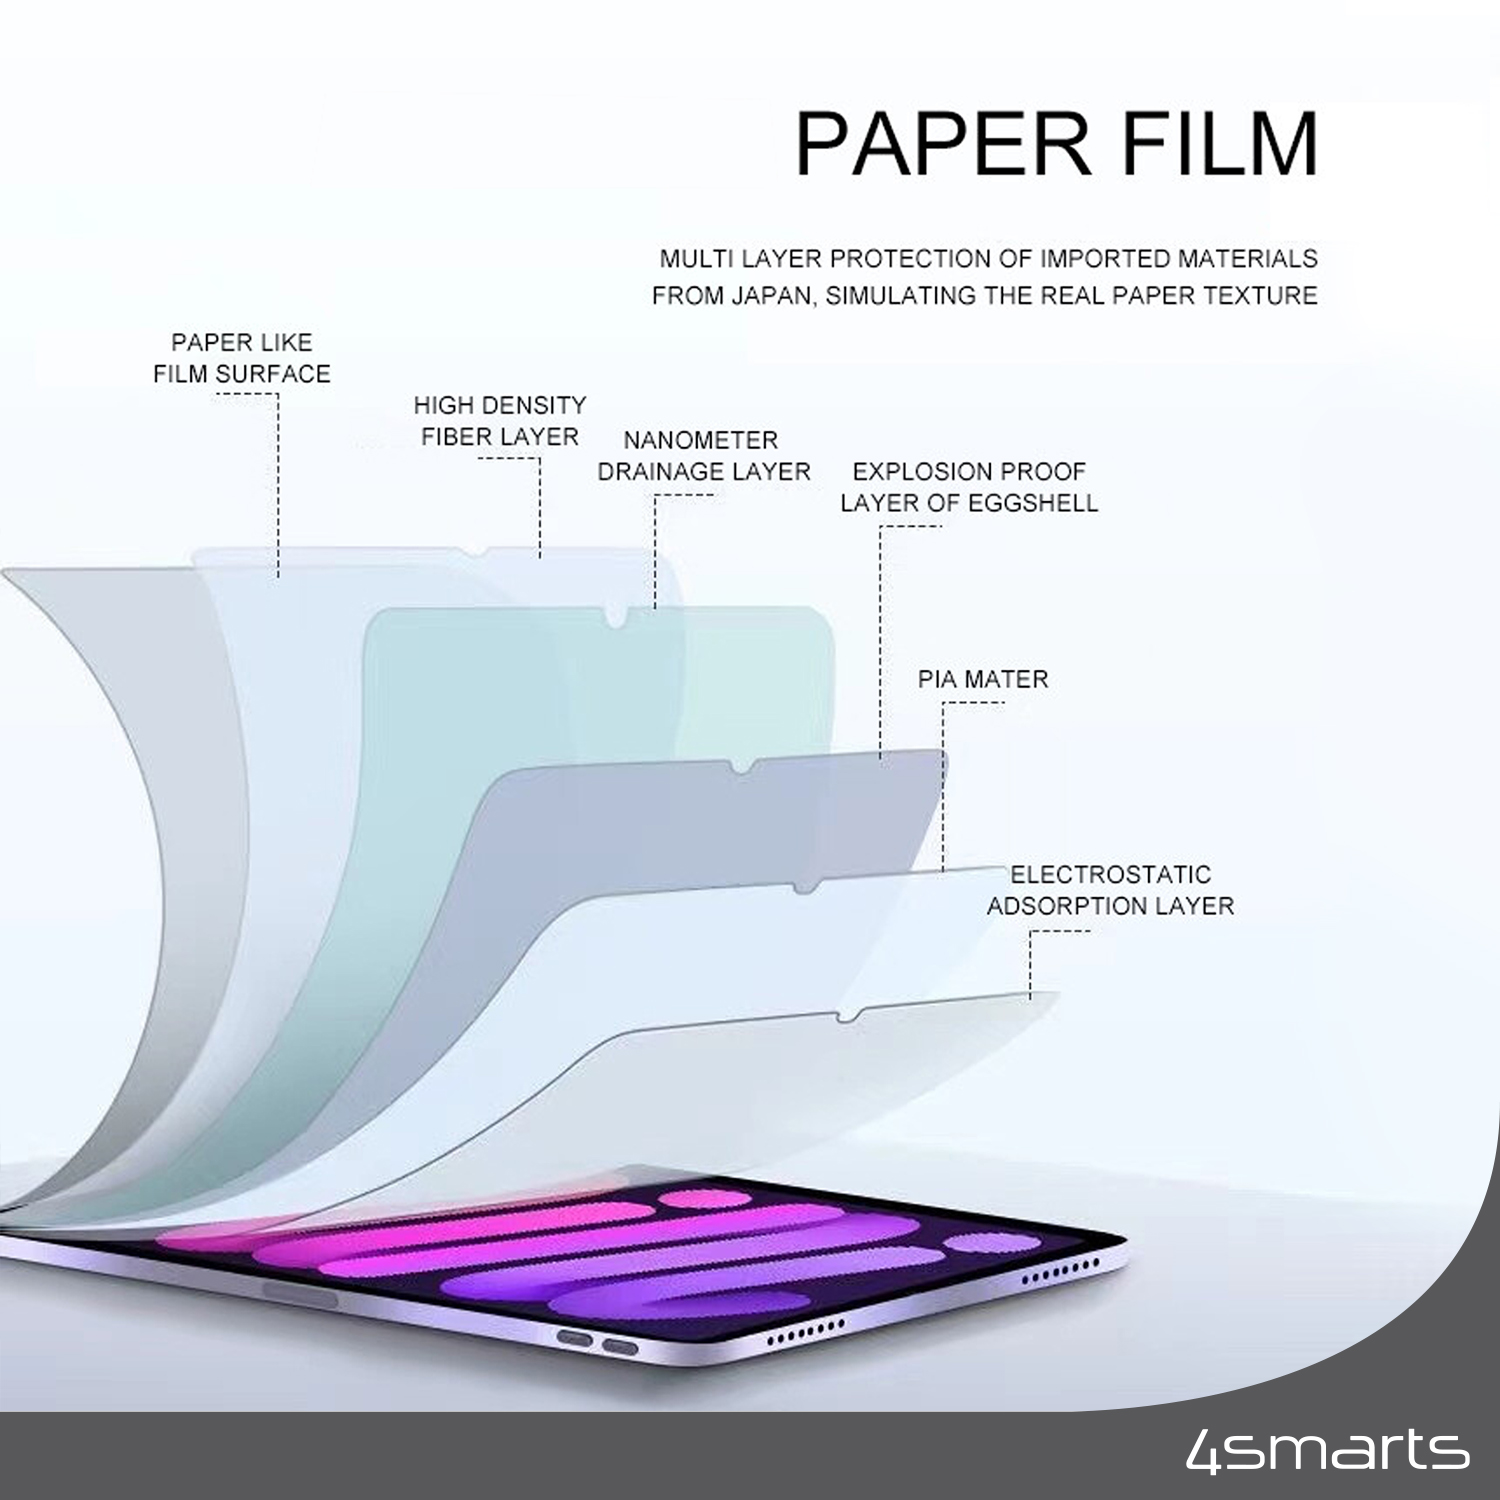 The Paperwrite iPad screen protector from 4smarts is the perfect choice for everyone who wants to protect their iPad display easily and quickly.